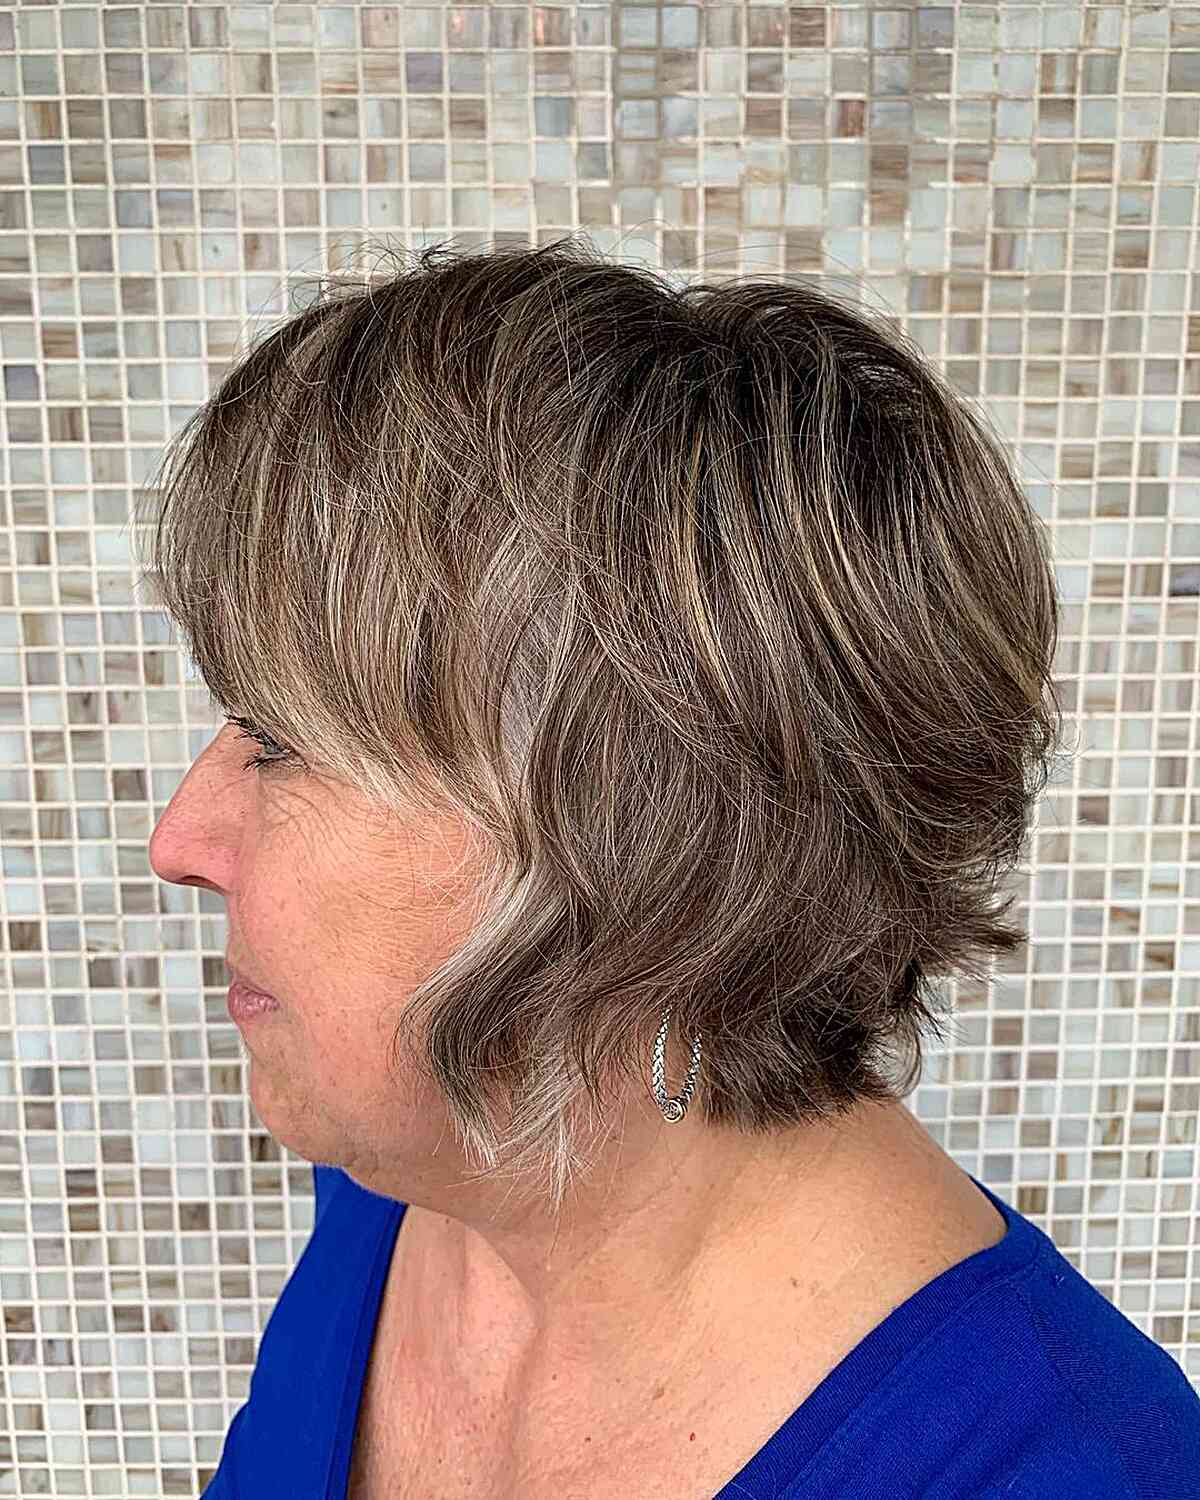 Short Shaggy Bixie with Soft Bangs and Choppy Ends for Older Women with Fuller Faces